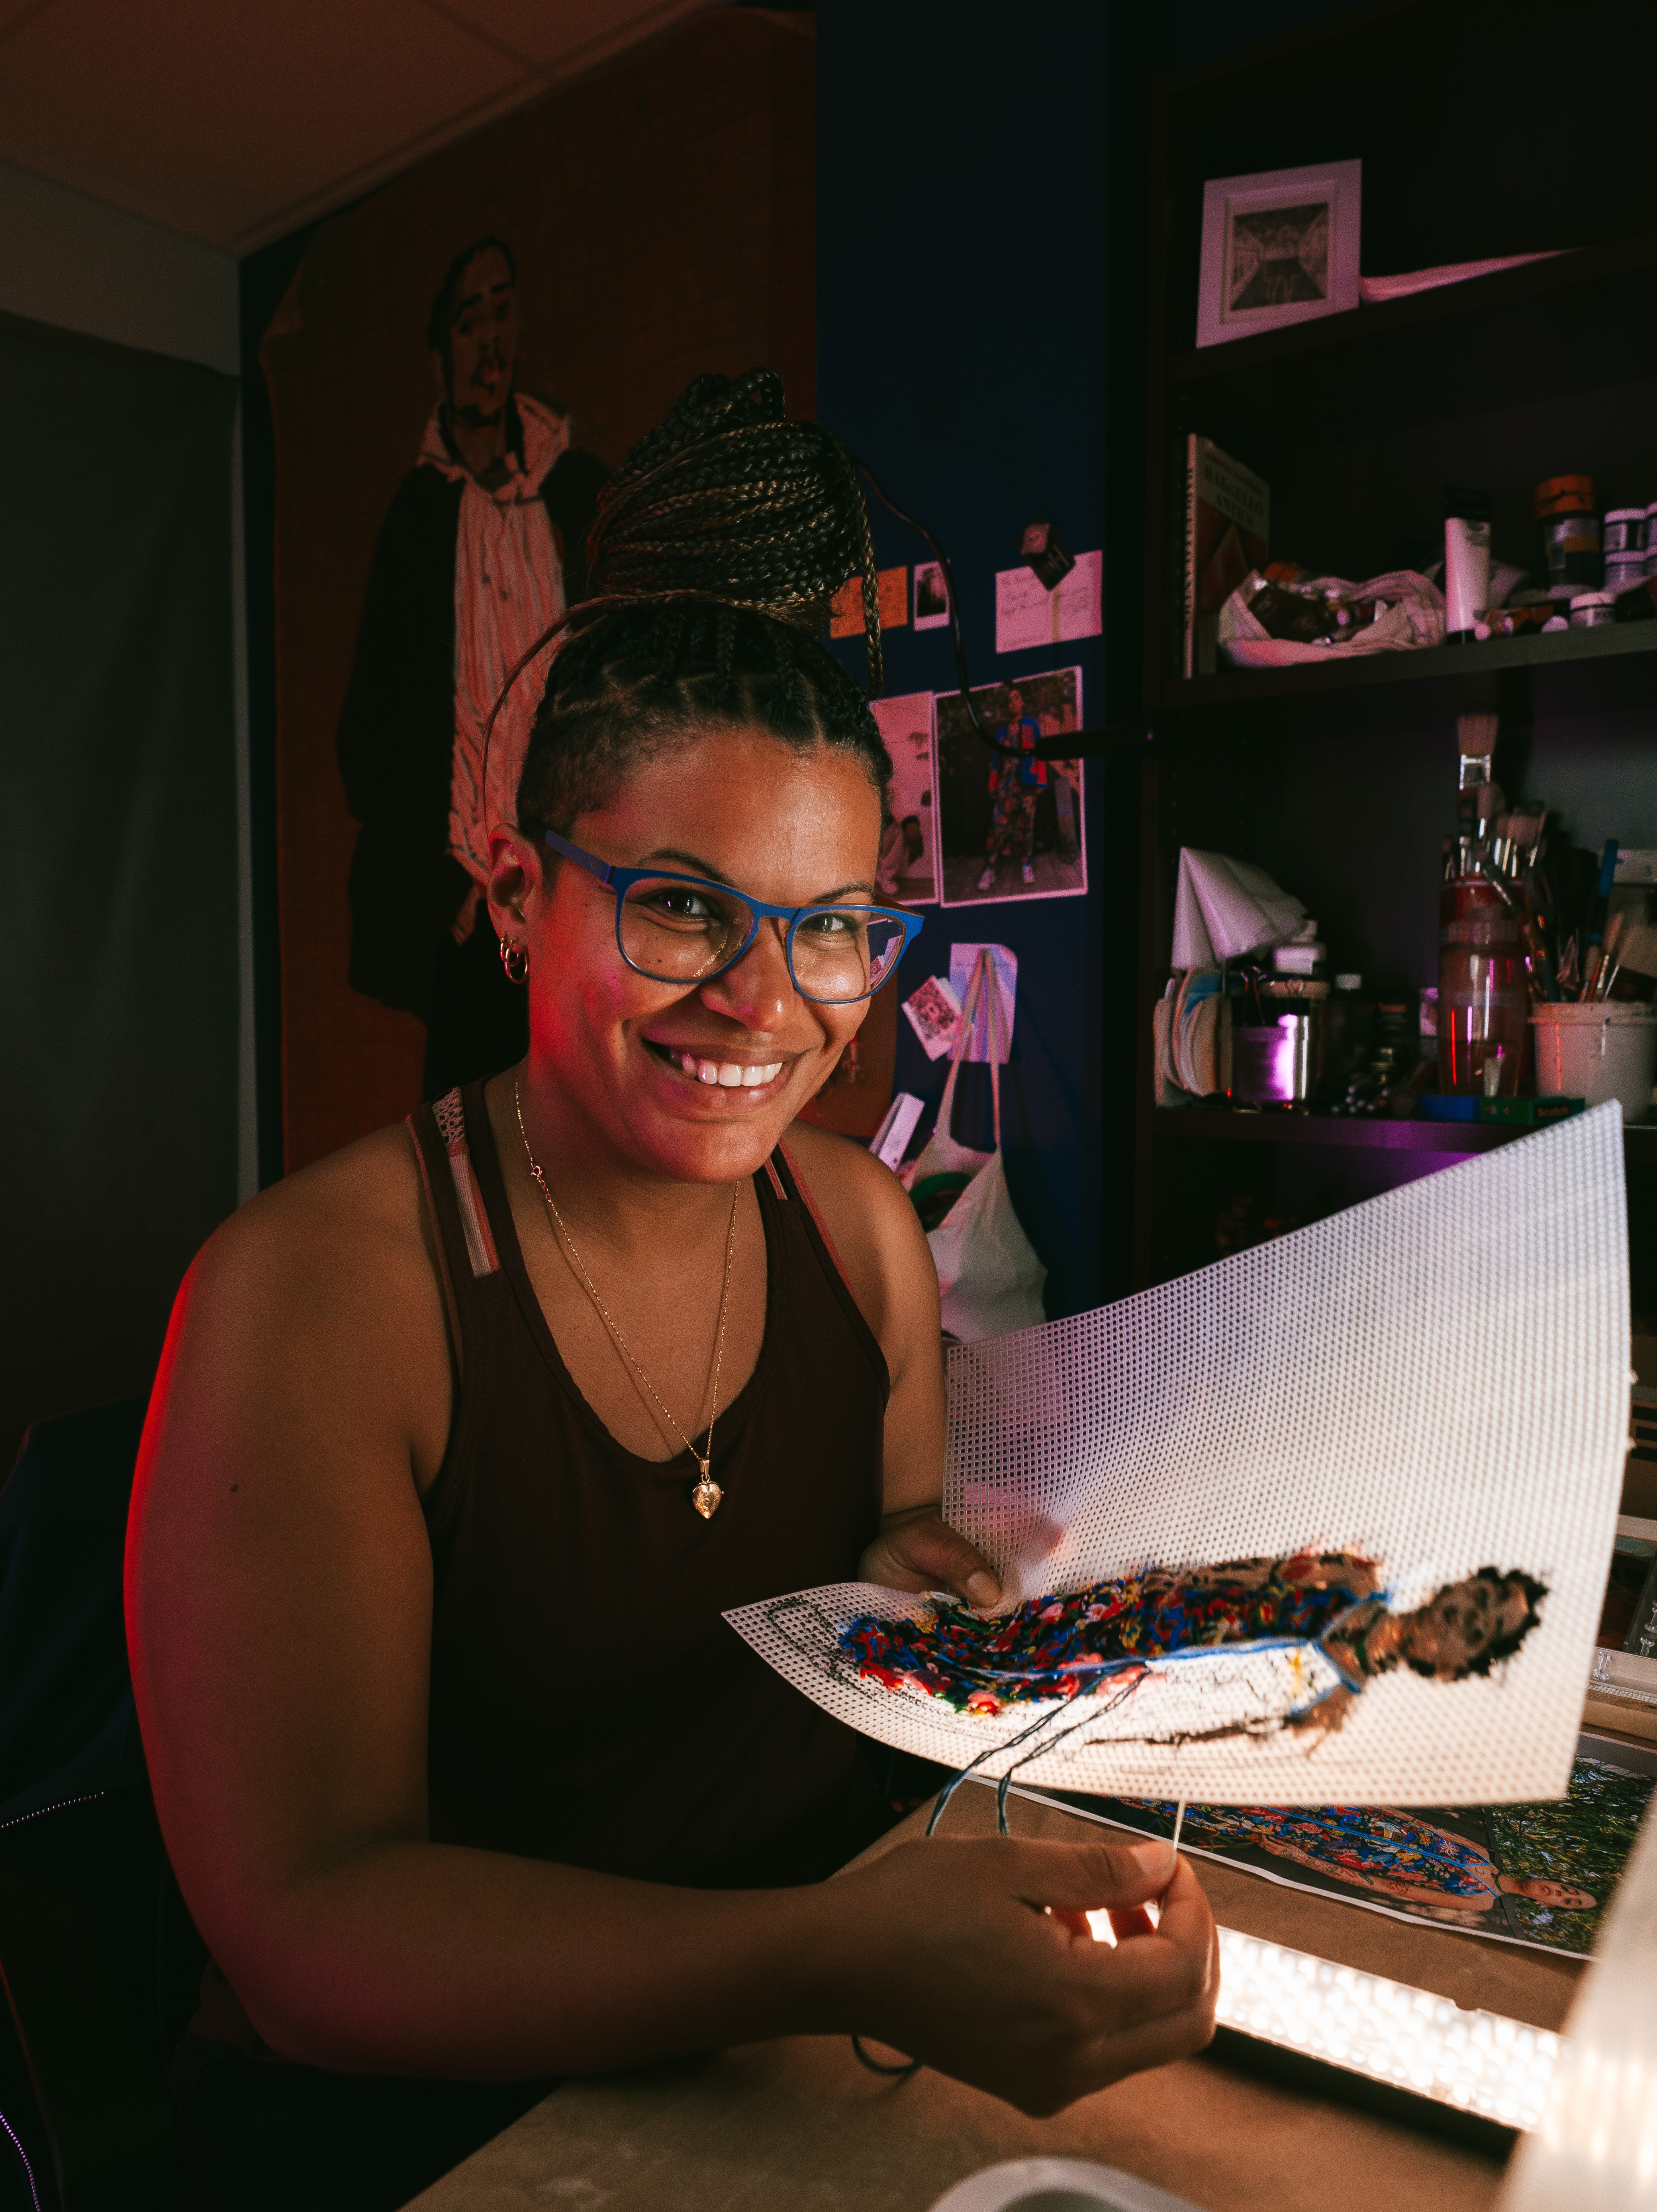 Kandy Lopez working on a portrait. Photo by ShootmeJade.